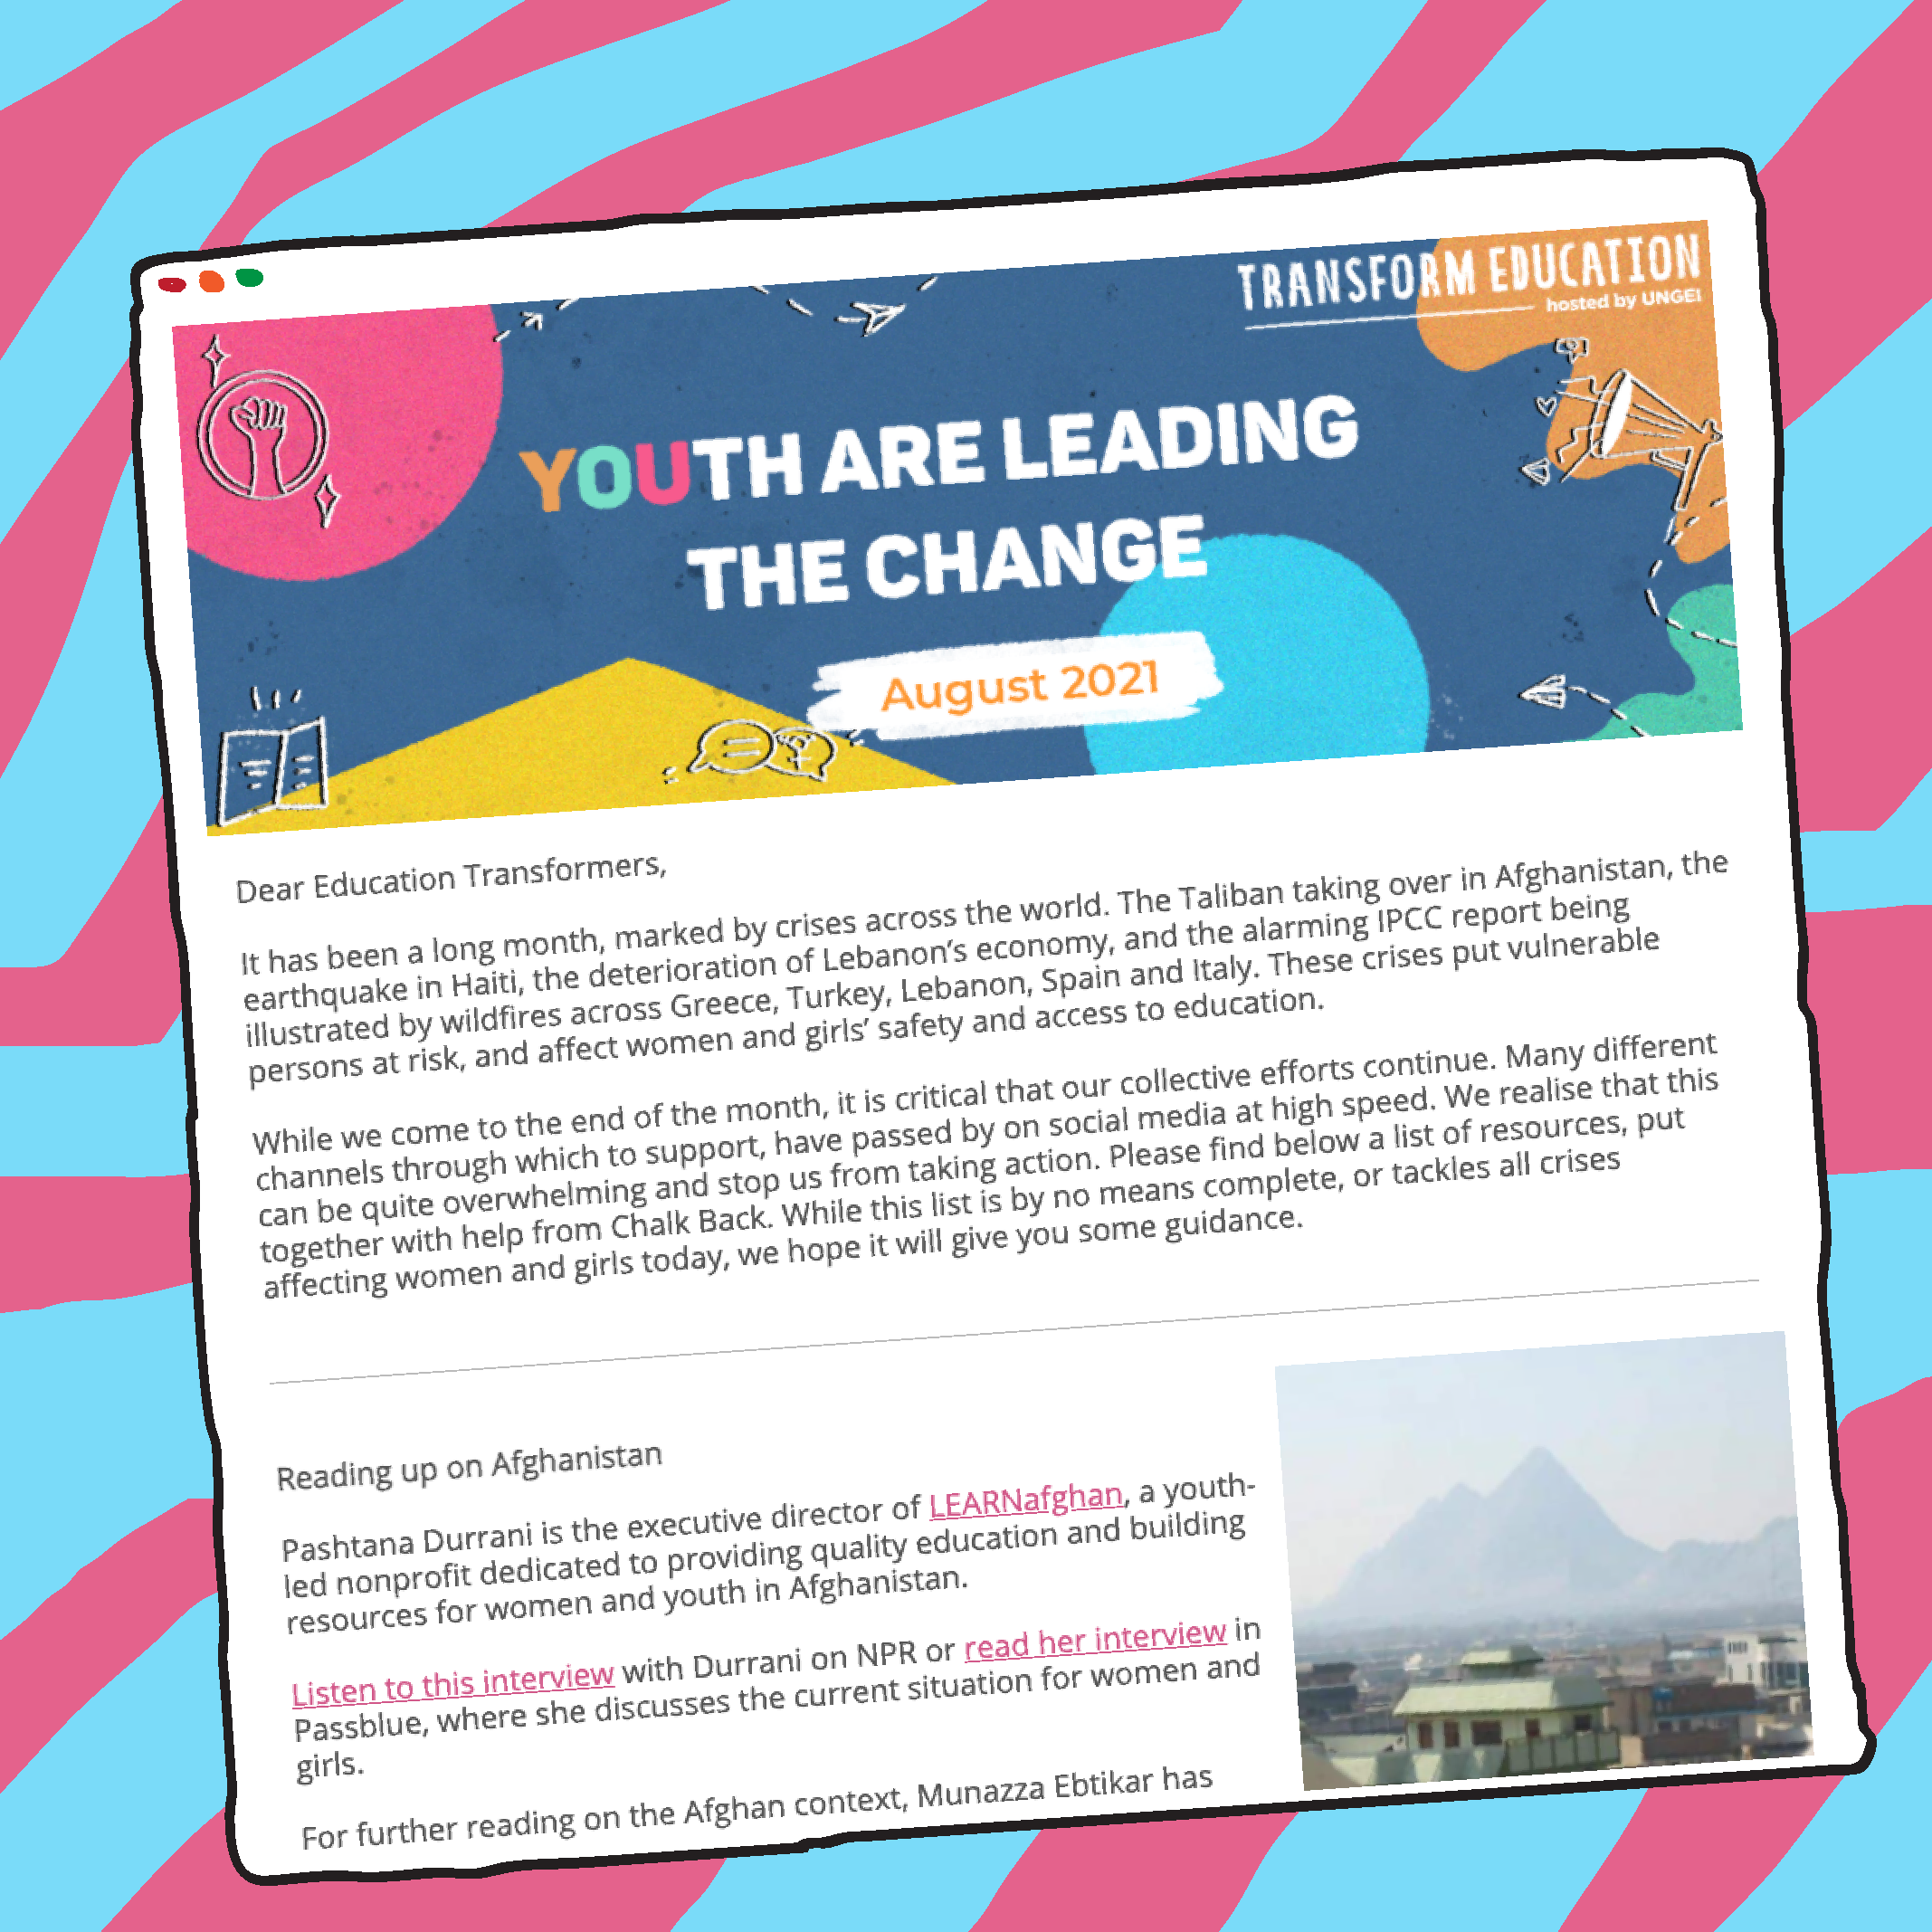 The Transform Education Newsletter